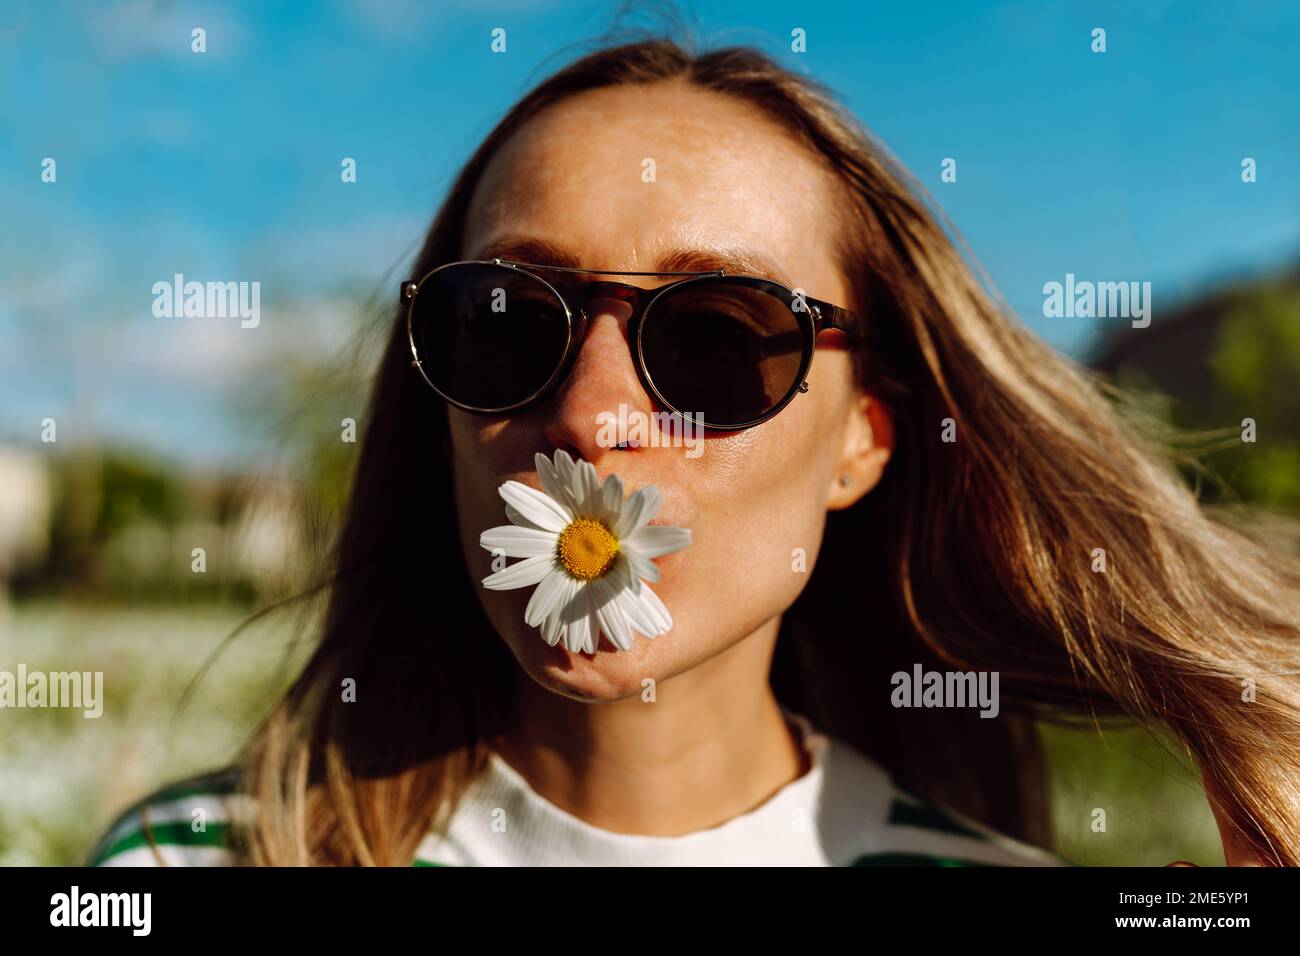 Portrait of a long-haired woman with hair fluttering in the wind and a daisy in her shirts Stock Photo